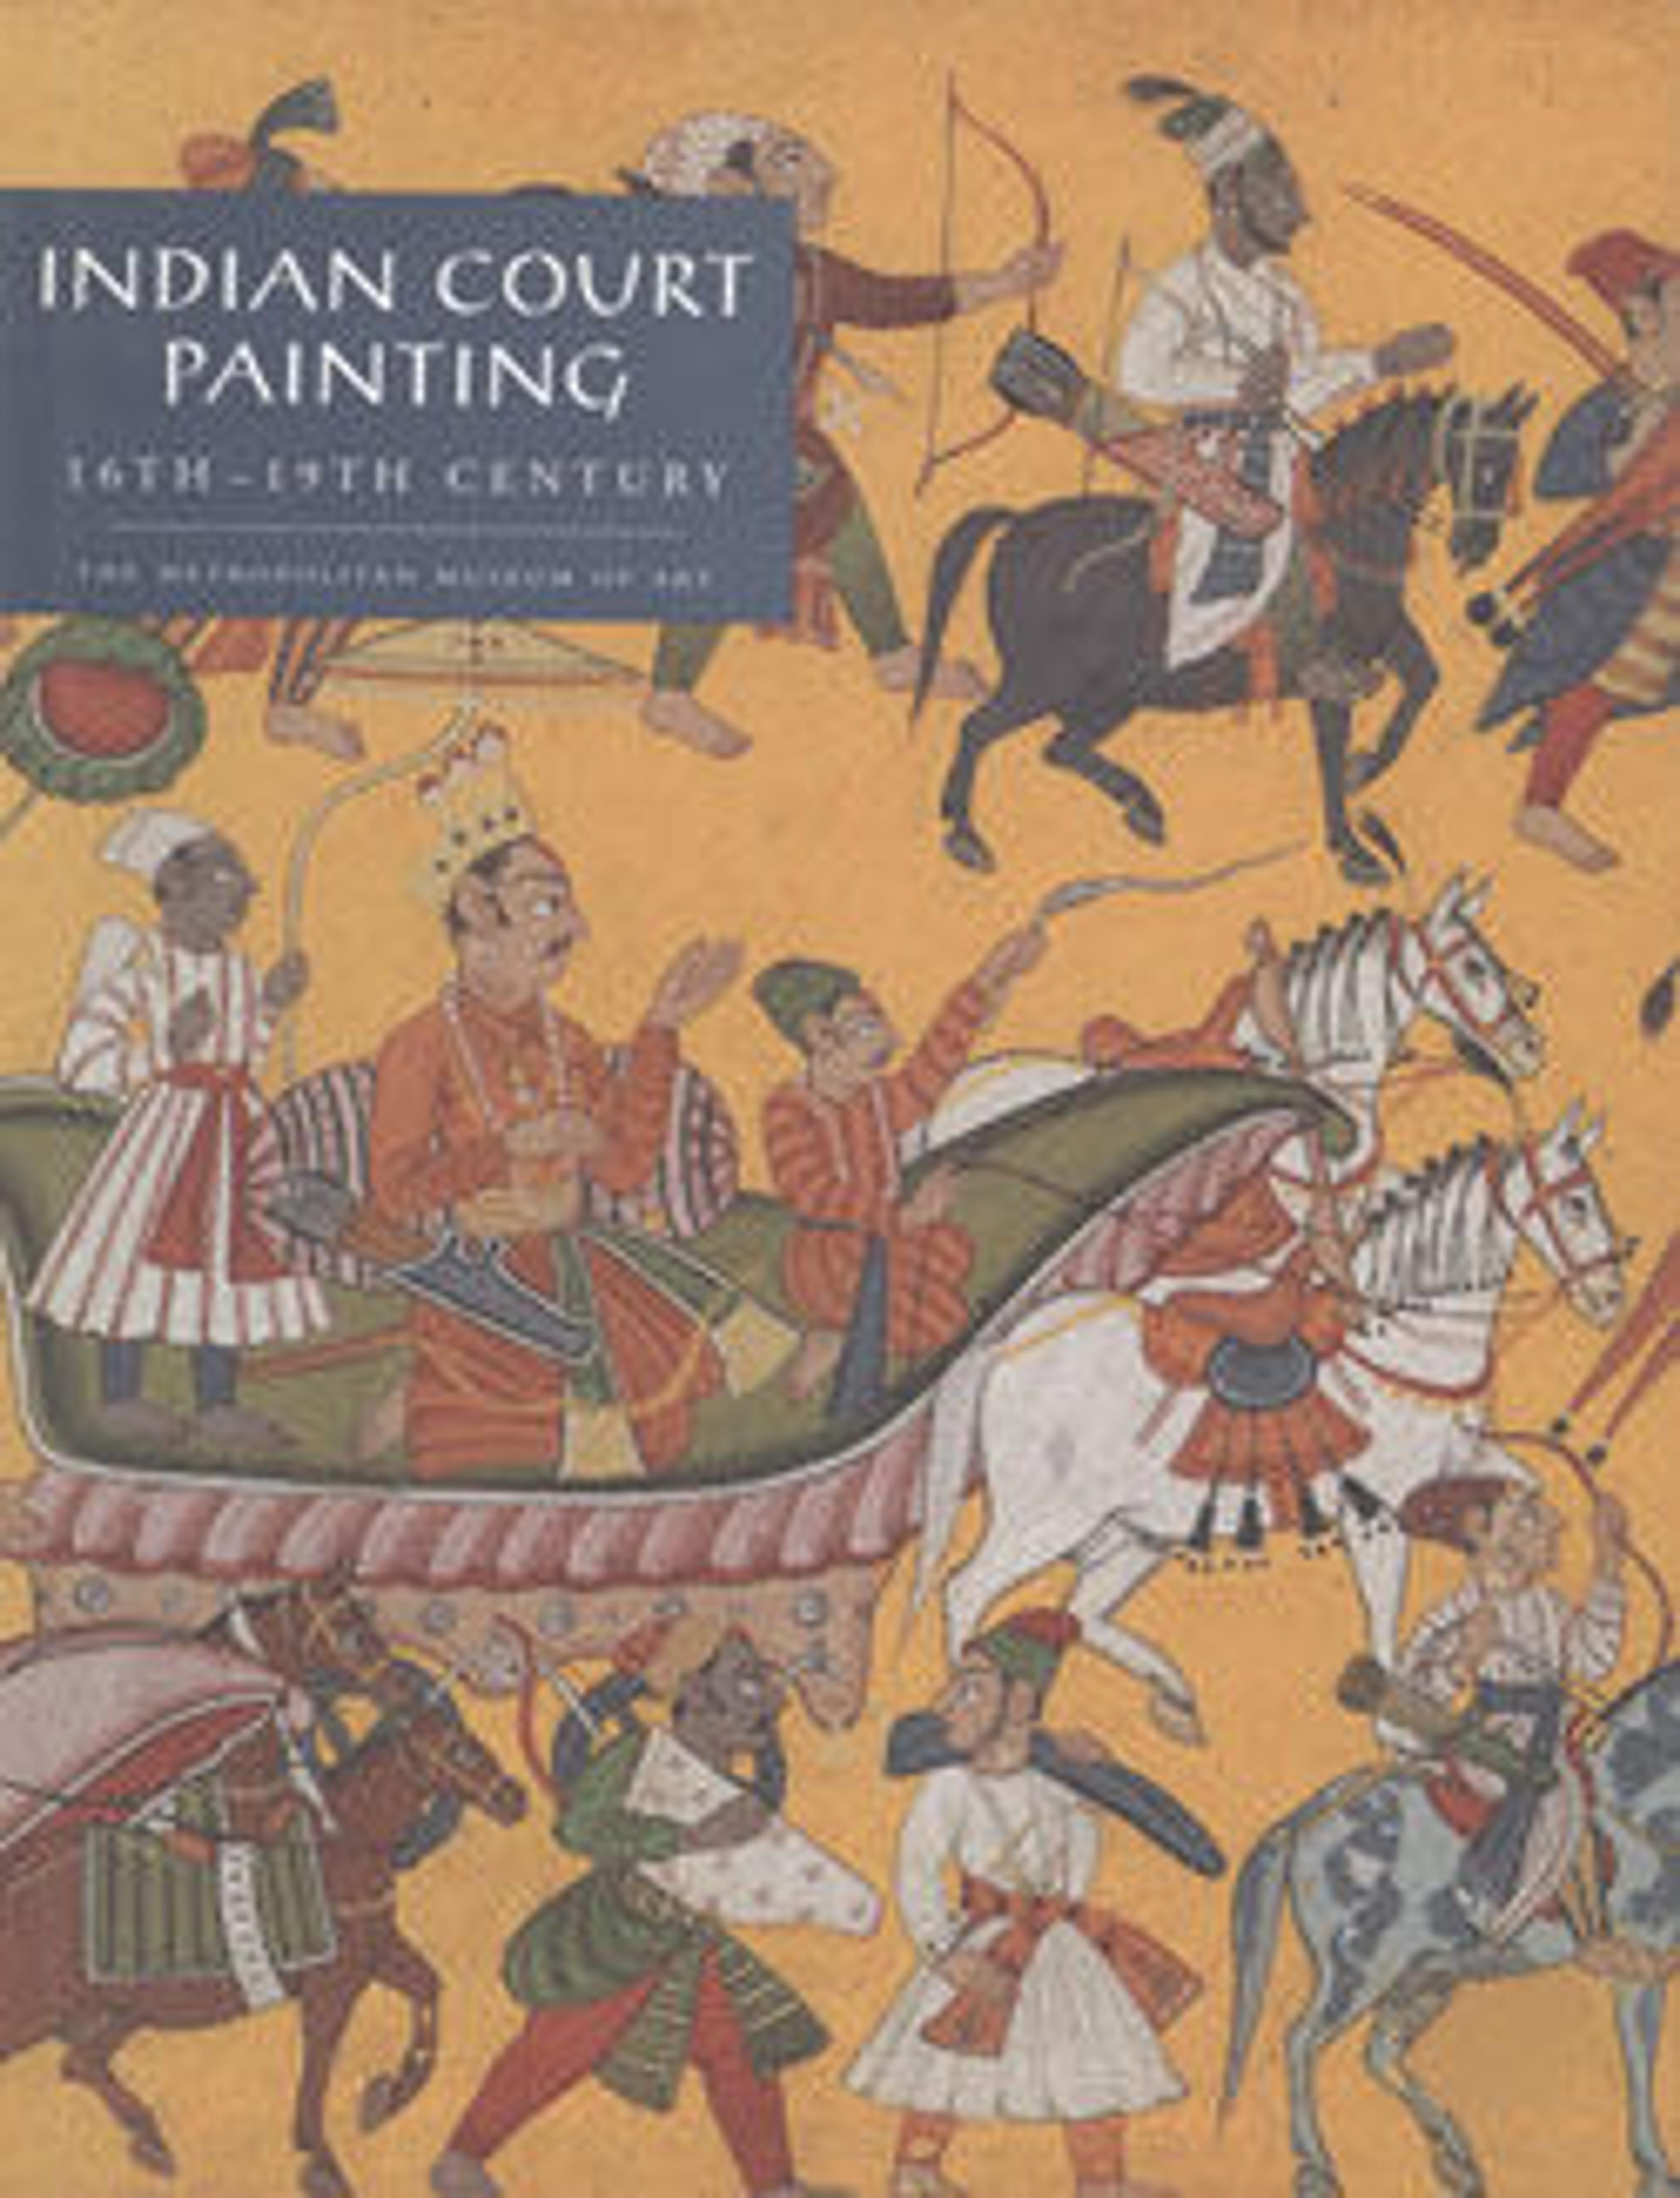 Indian Court Painting, 16th-19th Century